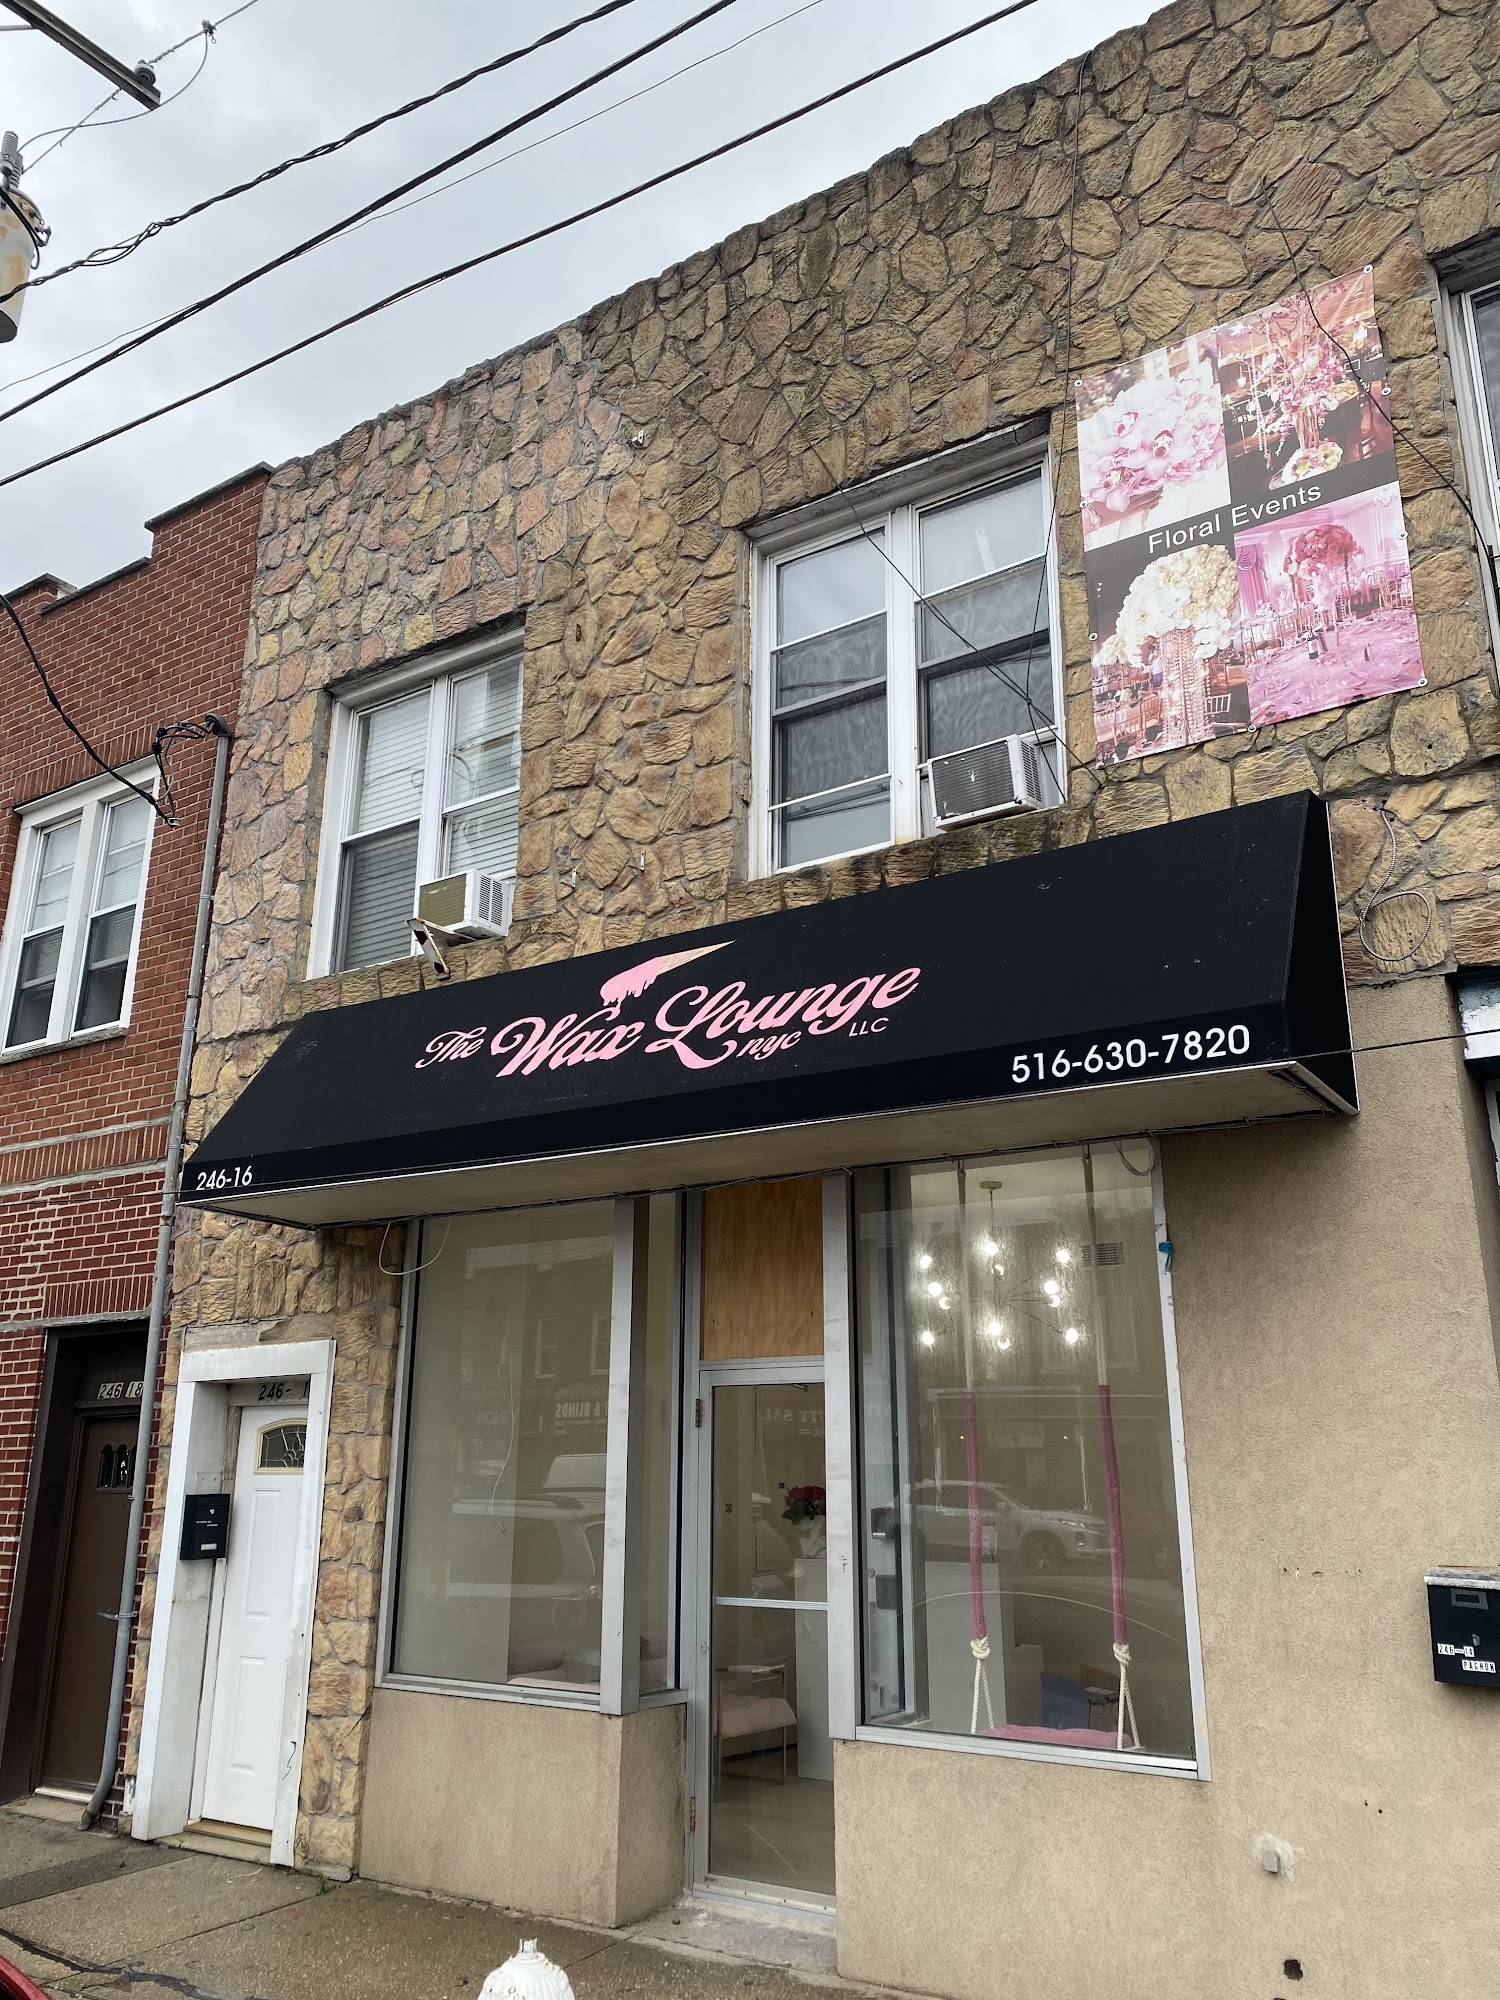 The wax lounge nyc 246-16 Jericho Turnpike, Floral Park New York 11001